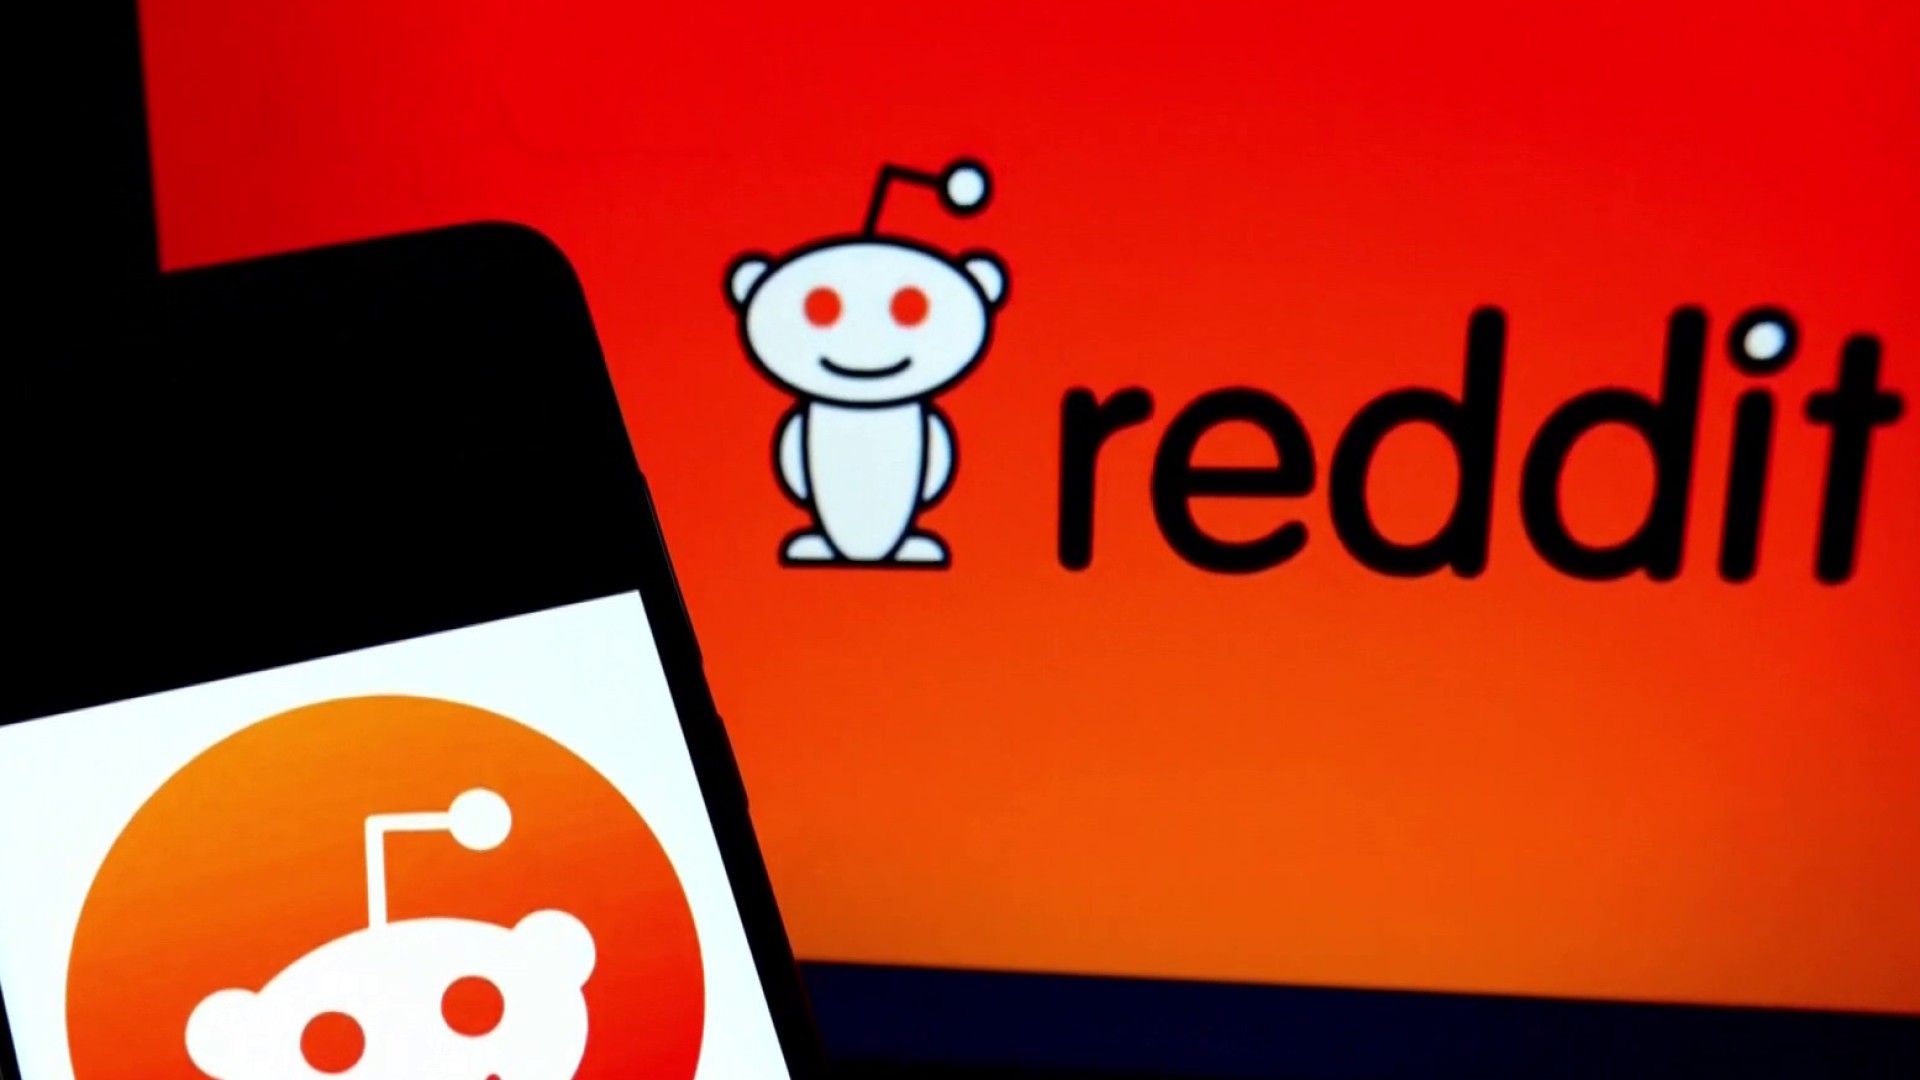 Reddit threatens to remove protest leaders